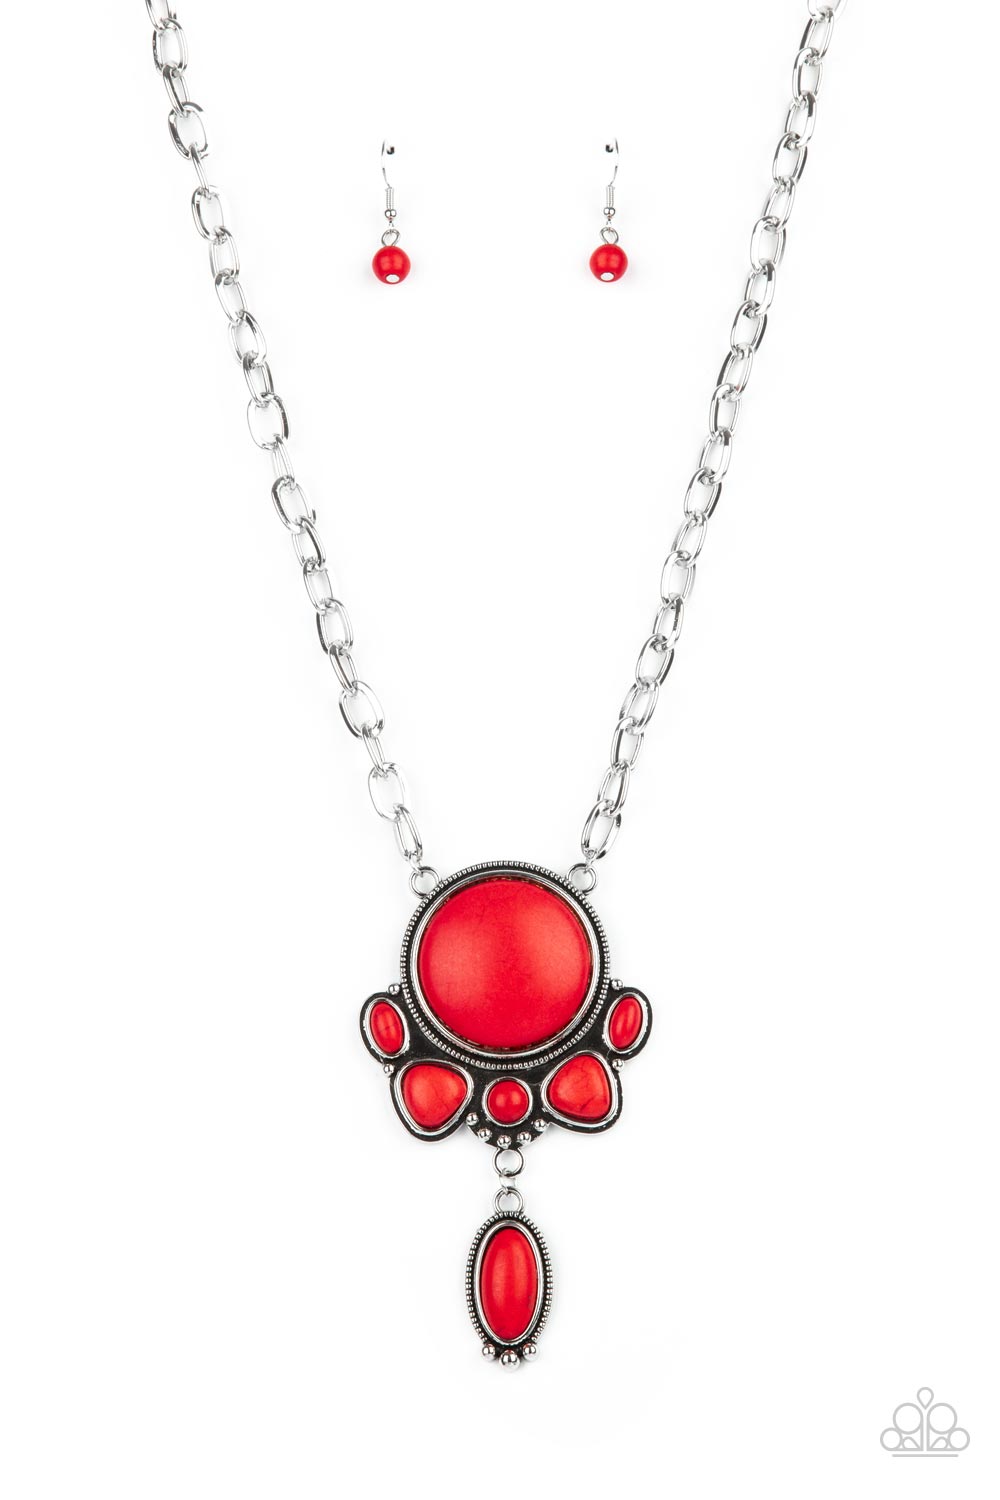 Geographically Gorgeous Red Stone Necklace - Paparazzi Accessories- lightbox - CarasShop.com - $5 Jewelry by Cara Jewels